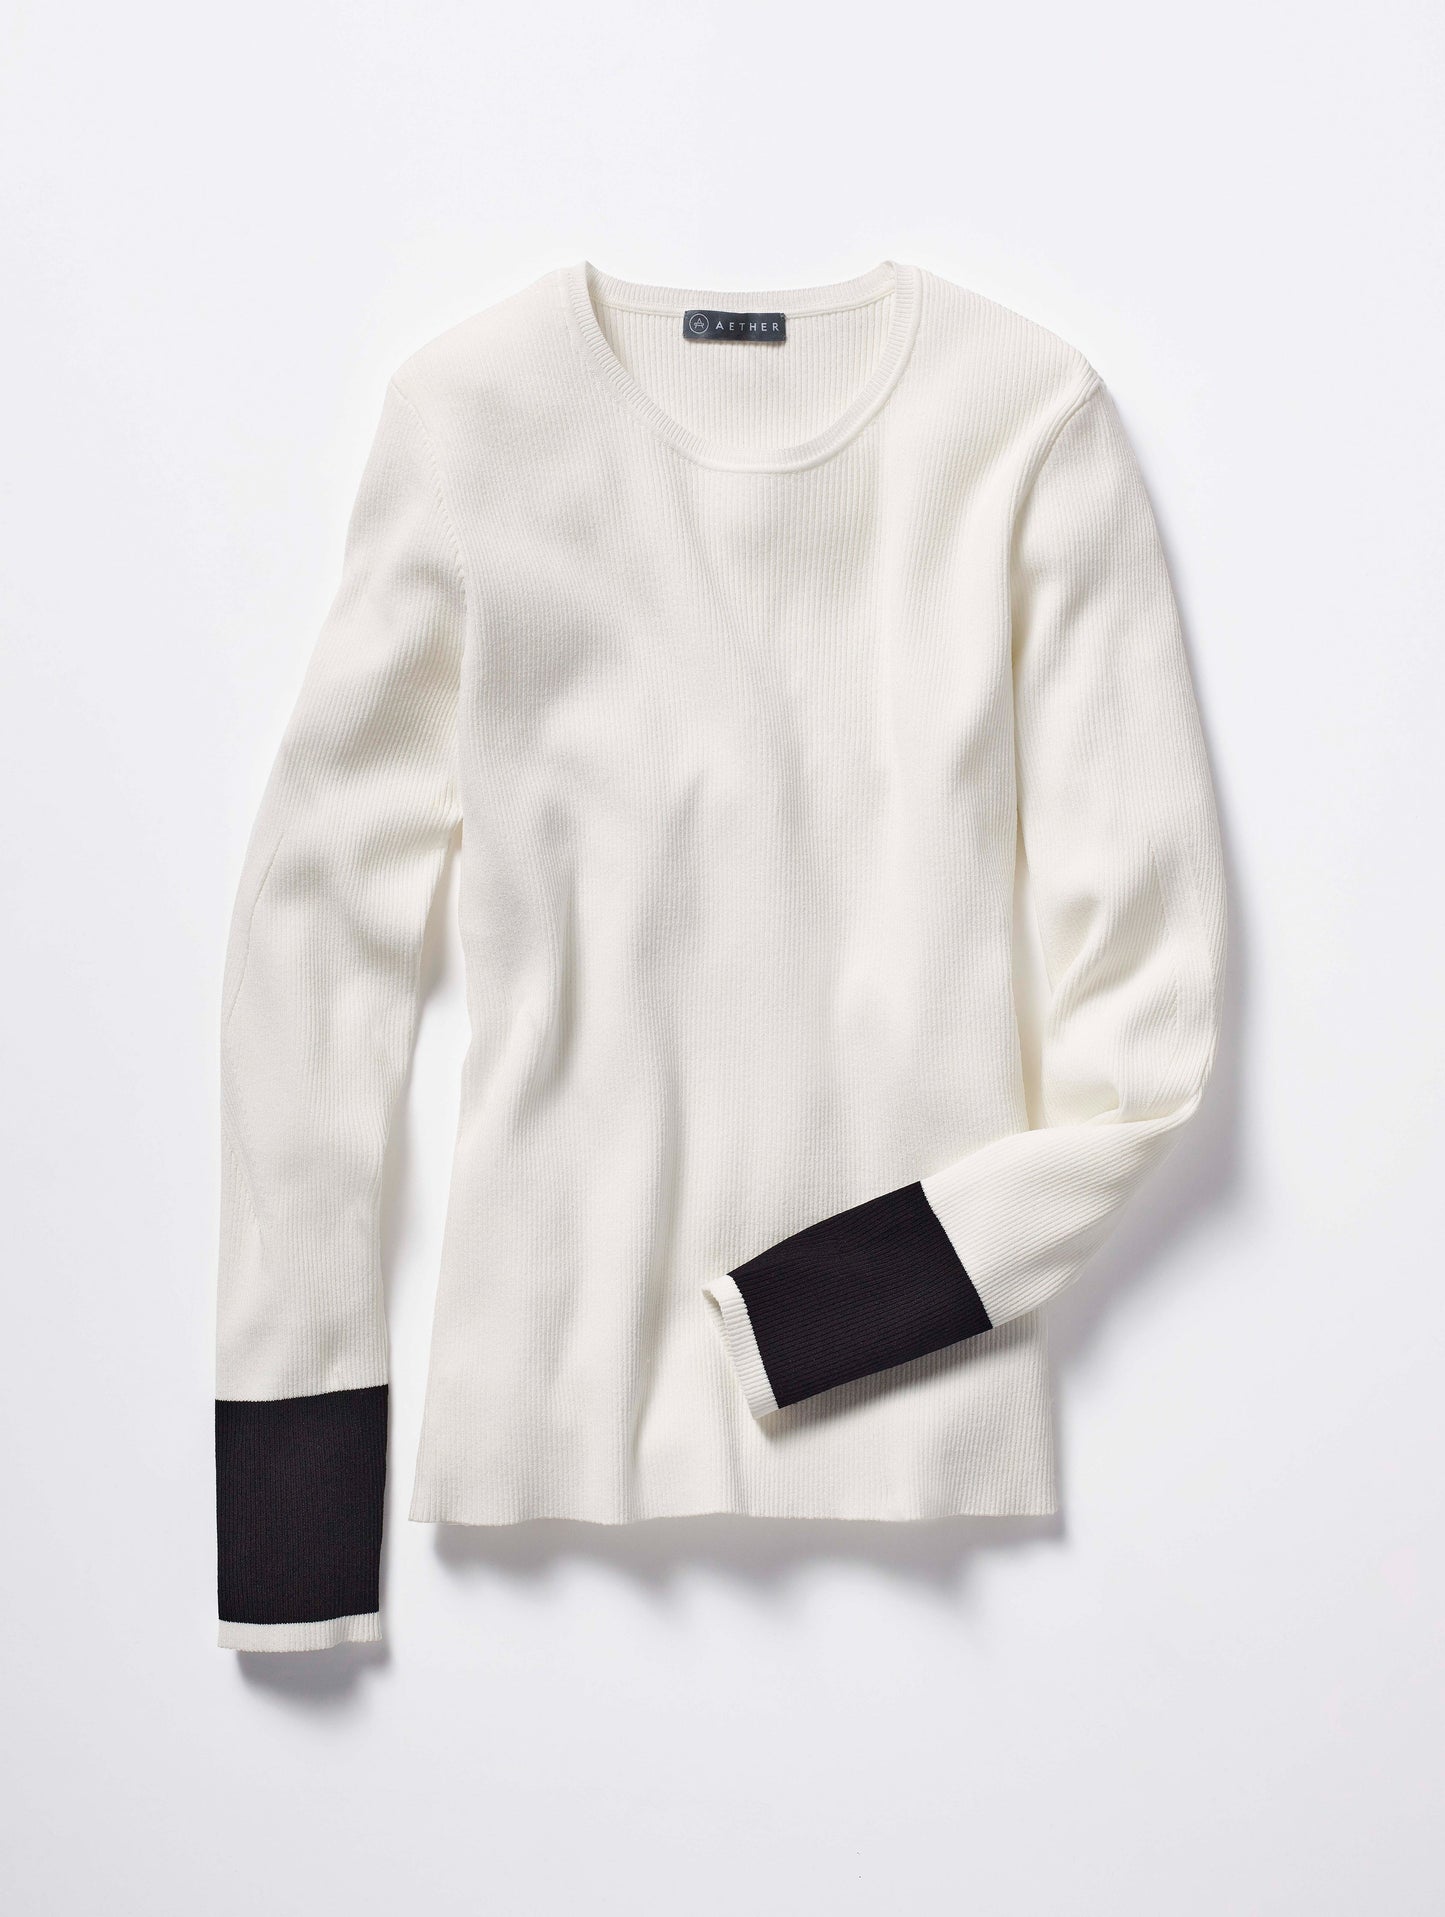 white sweater for women from Aether Apparel